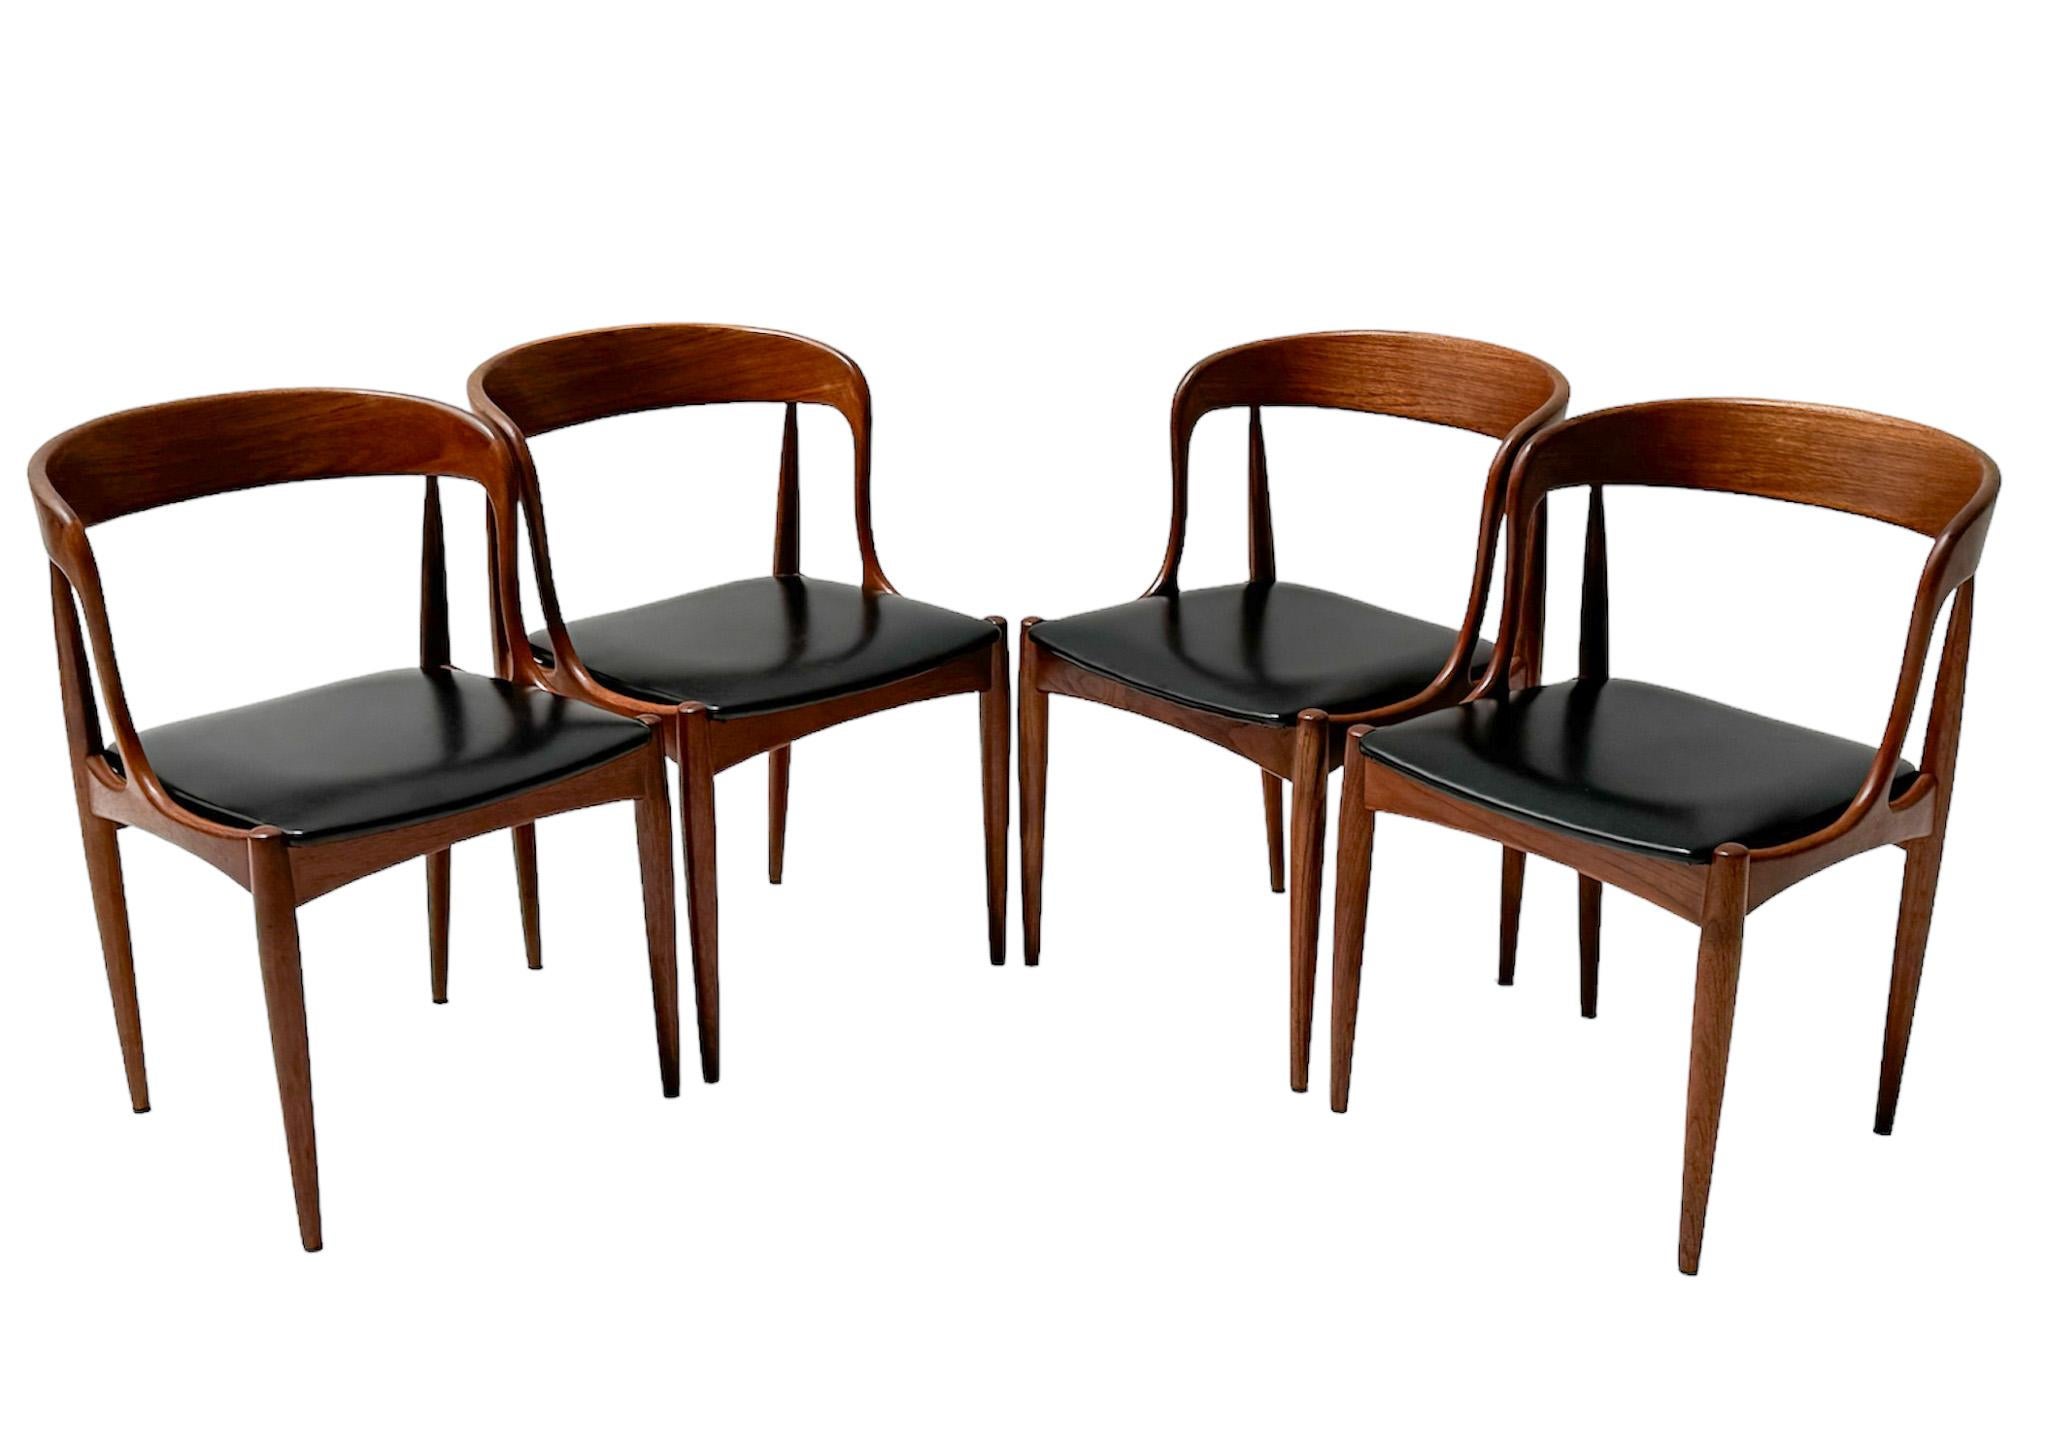 Danish Four Teak Mid-Century Modern Dining Chairs by Johannes Andersen for Uldum, 1960s For Sale